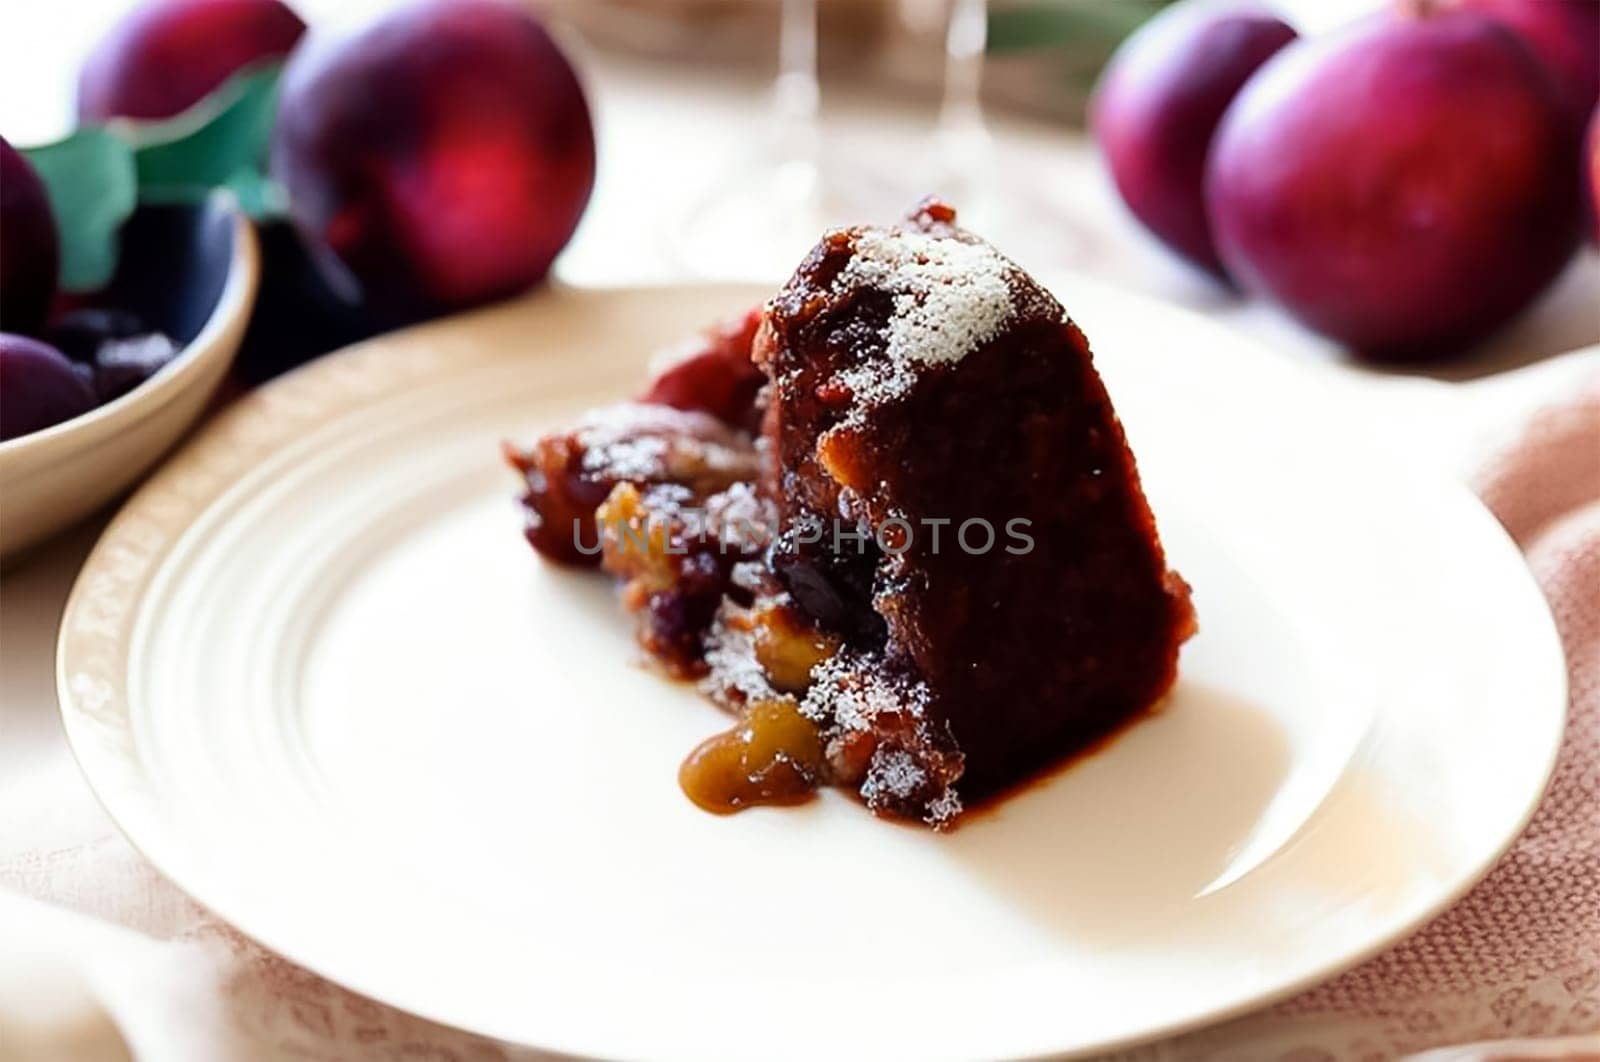 Traditional Christmas pudding, a piece of fruit pie on a plate. In the background, fruits are ripe plums. Plum Pudding Day by claire_lucia